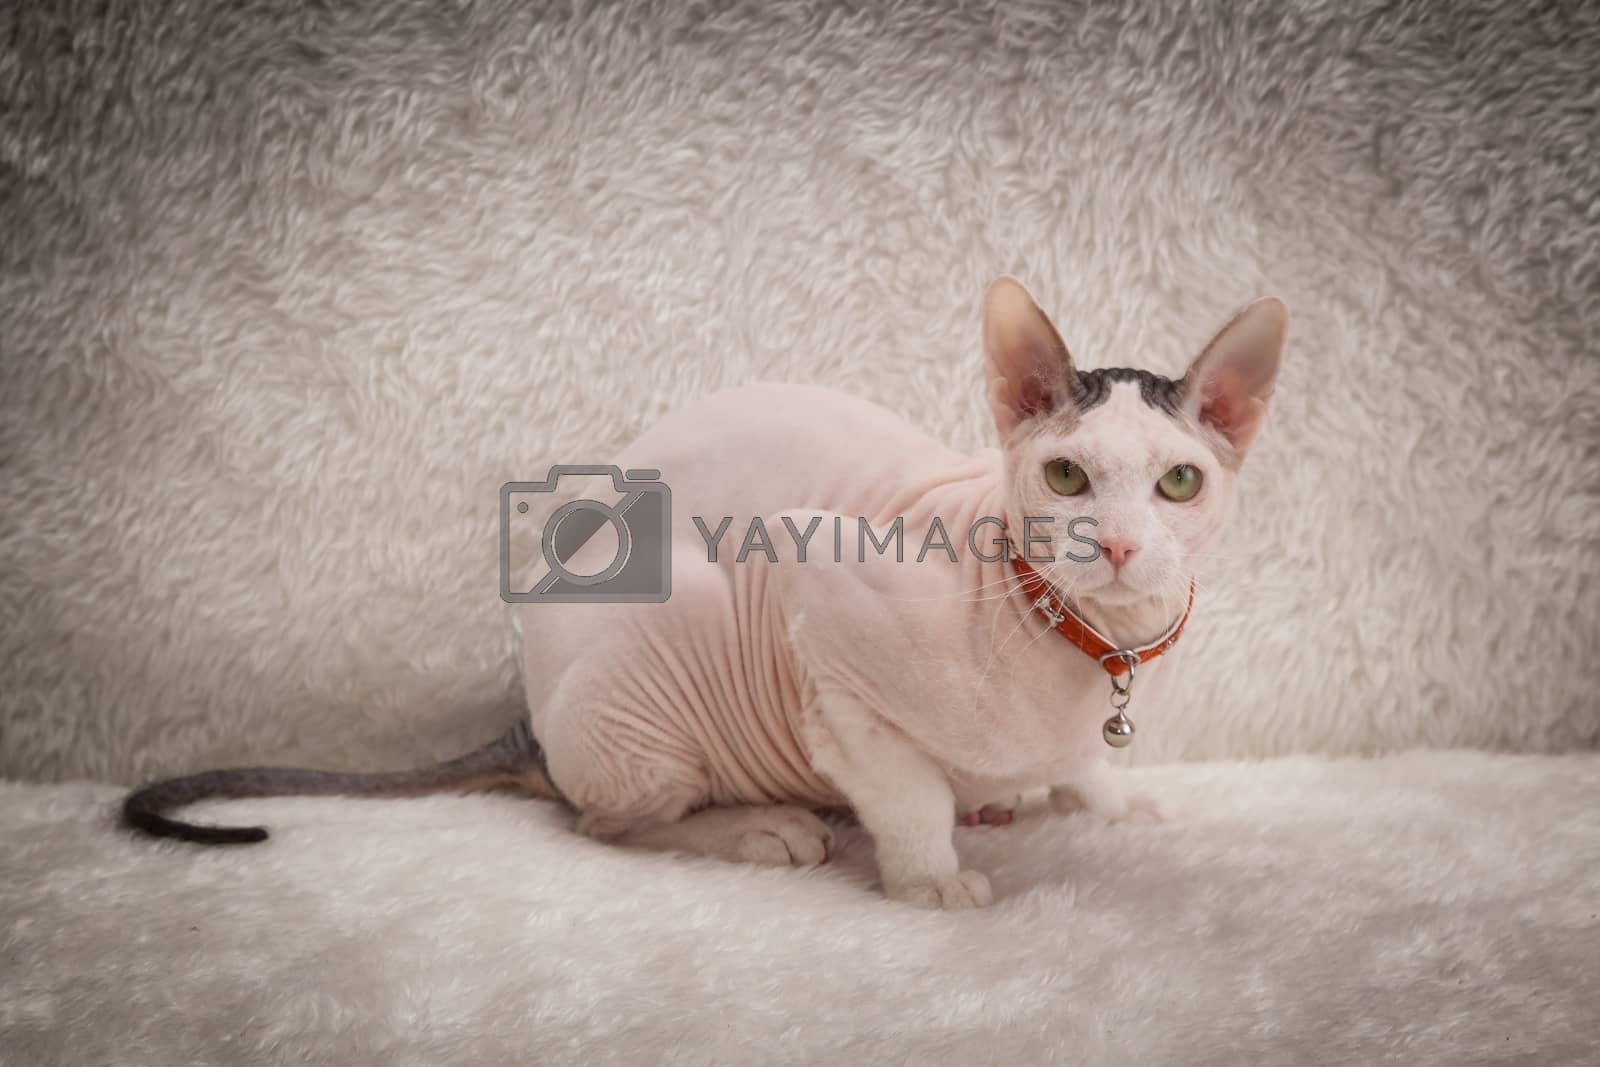 Royalty free image of Bald Sphynx cat on a sofa by sveter